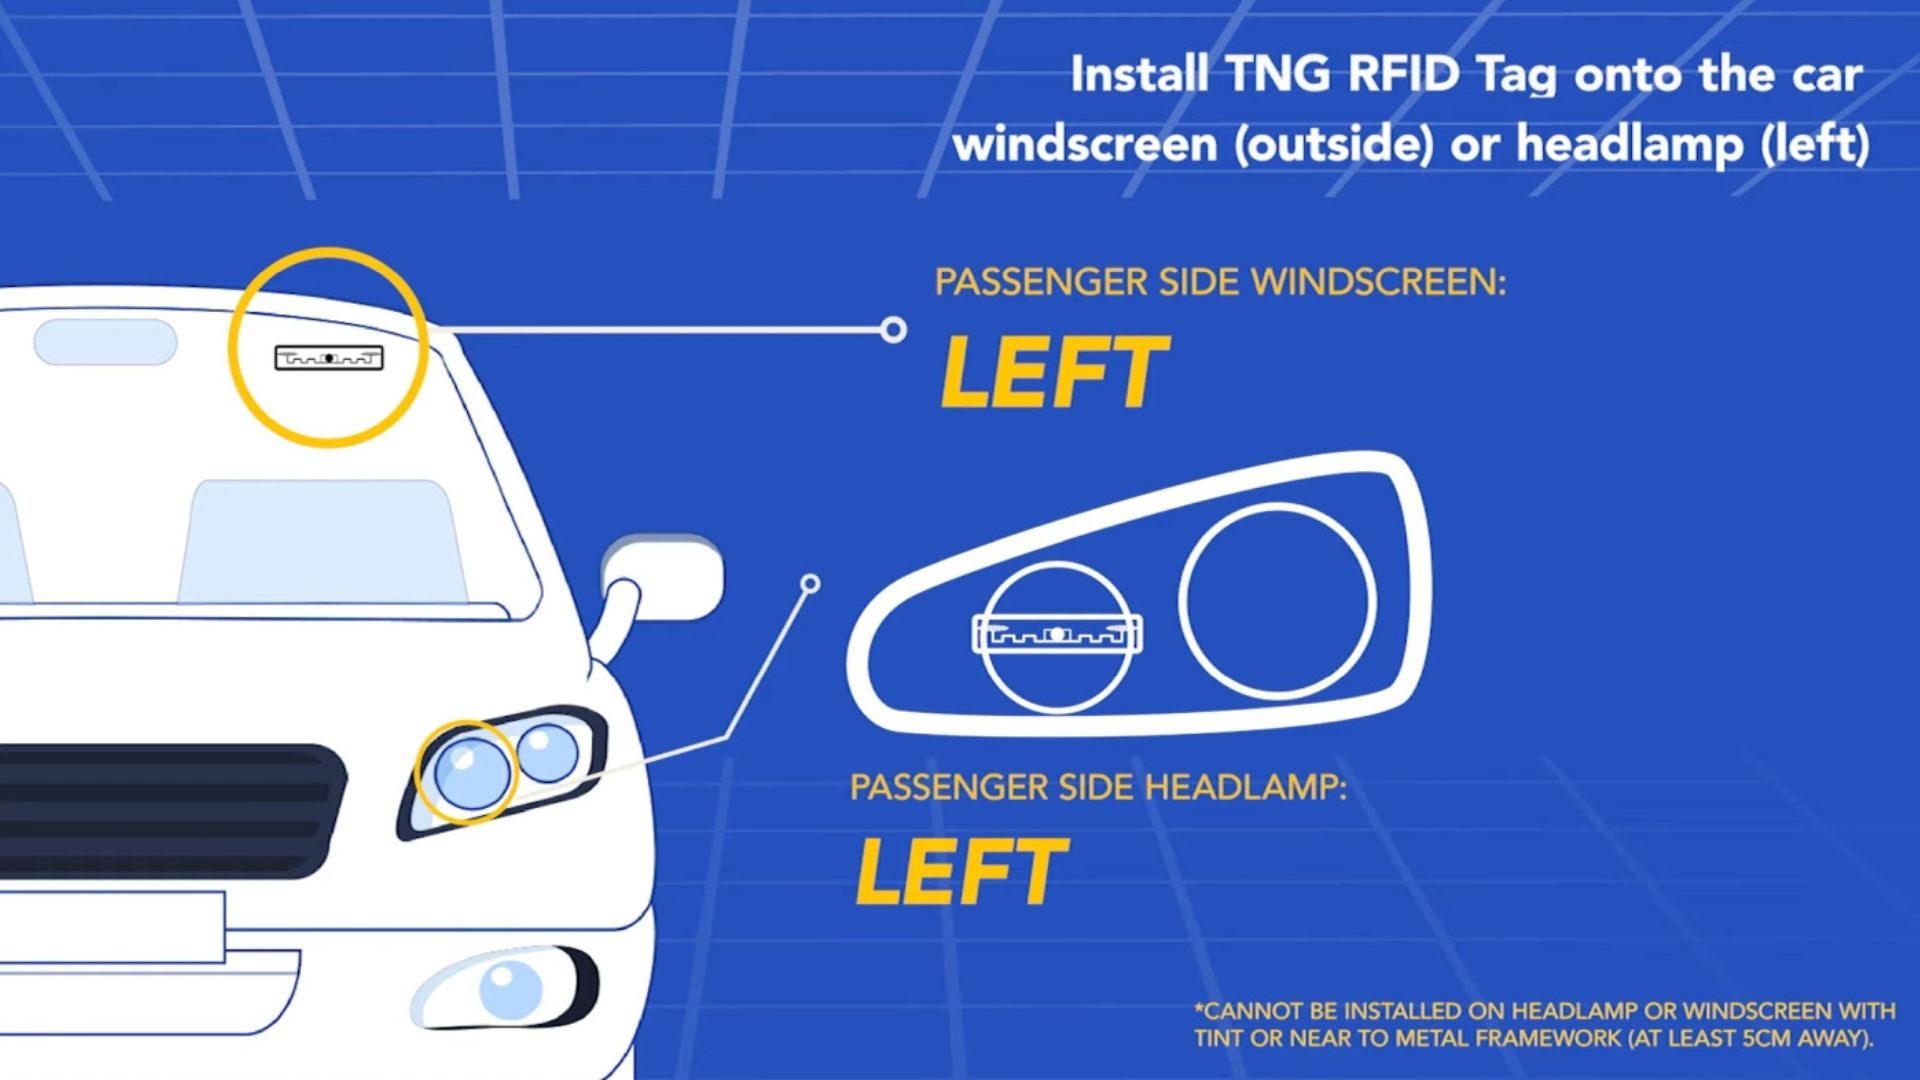 7 Things You Need To Know About Touch ‘n Go RFID - BHPetrol